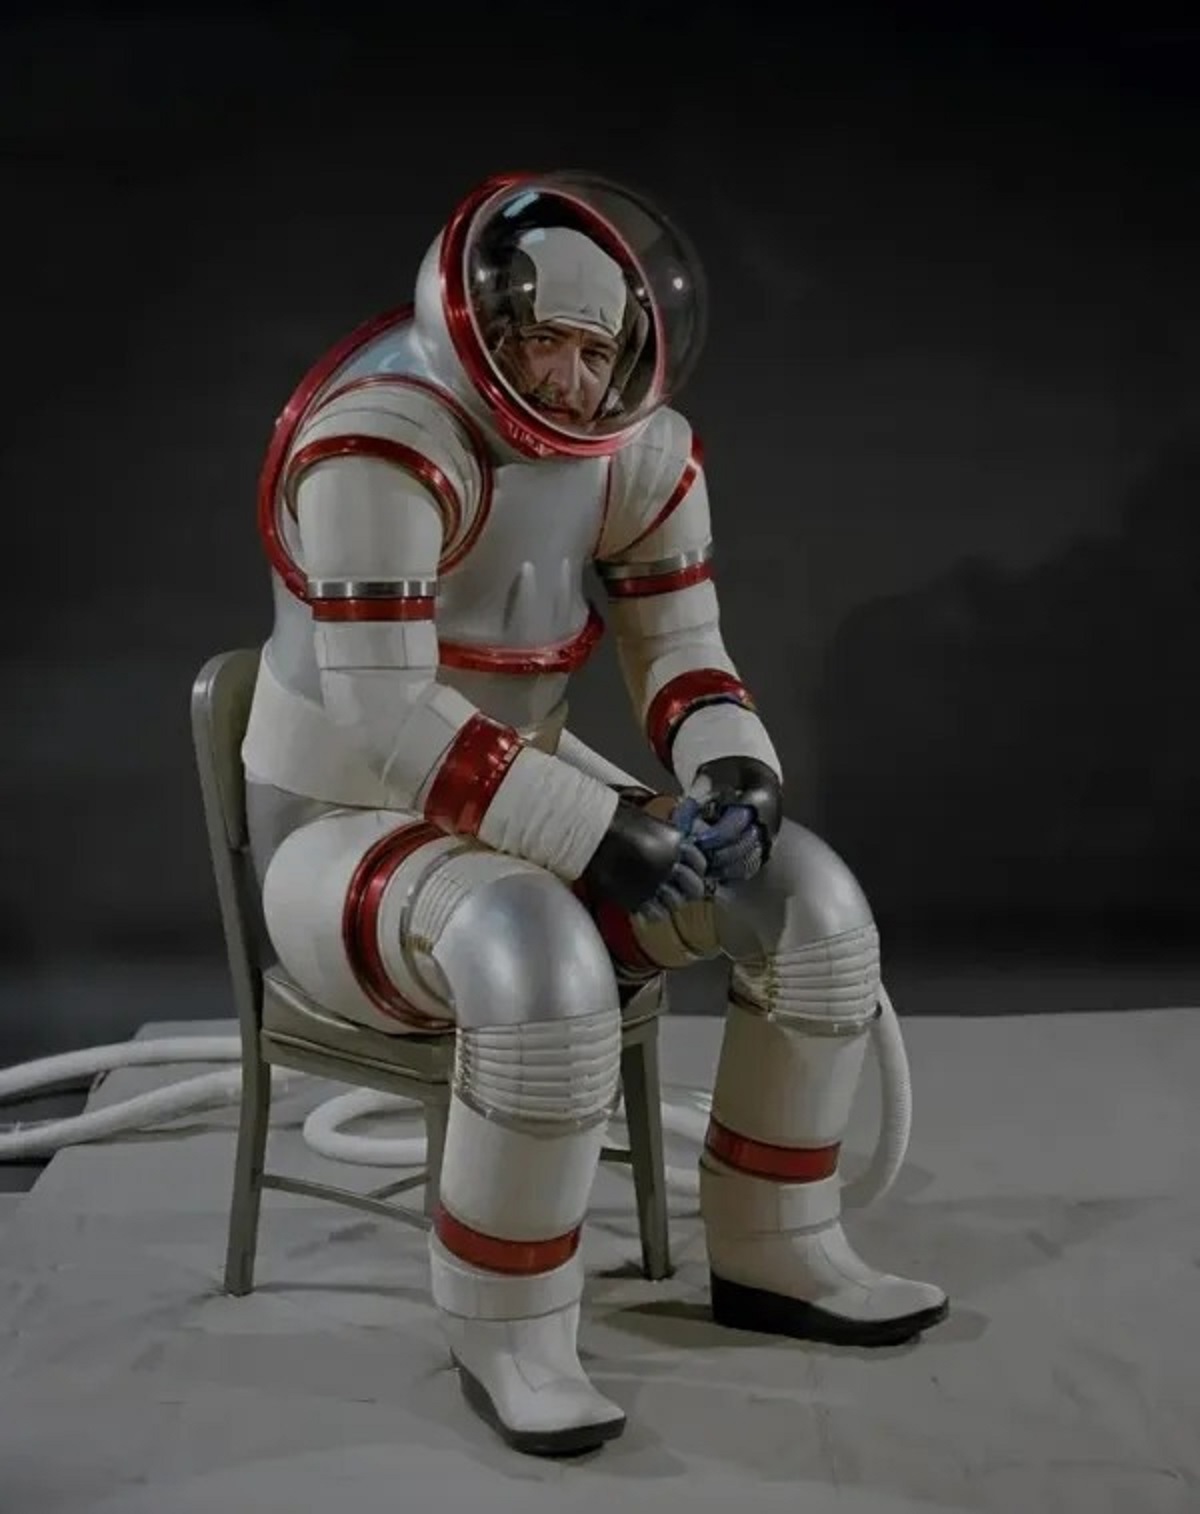 These photos show NASA’s innovative AX-3 spacesuit, 1970s.